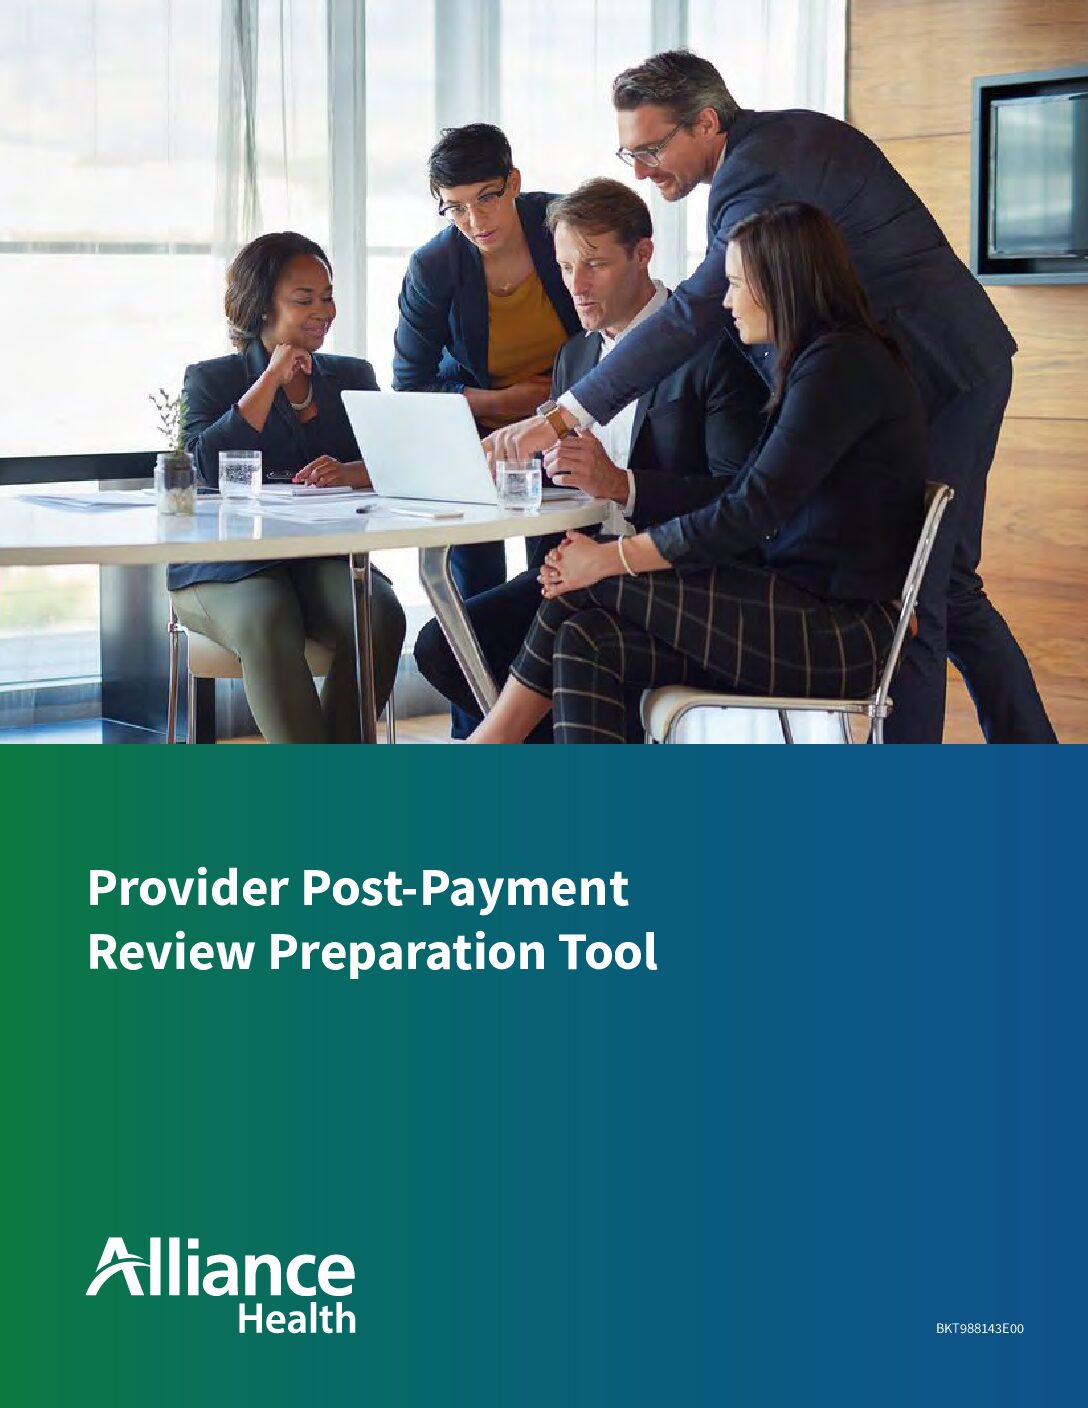 Provider Post-Payment Review Preparation Tool